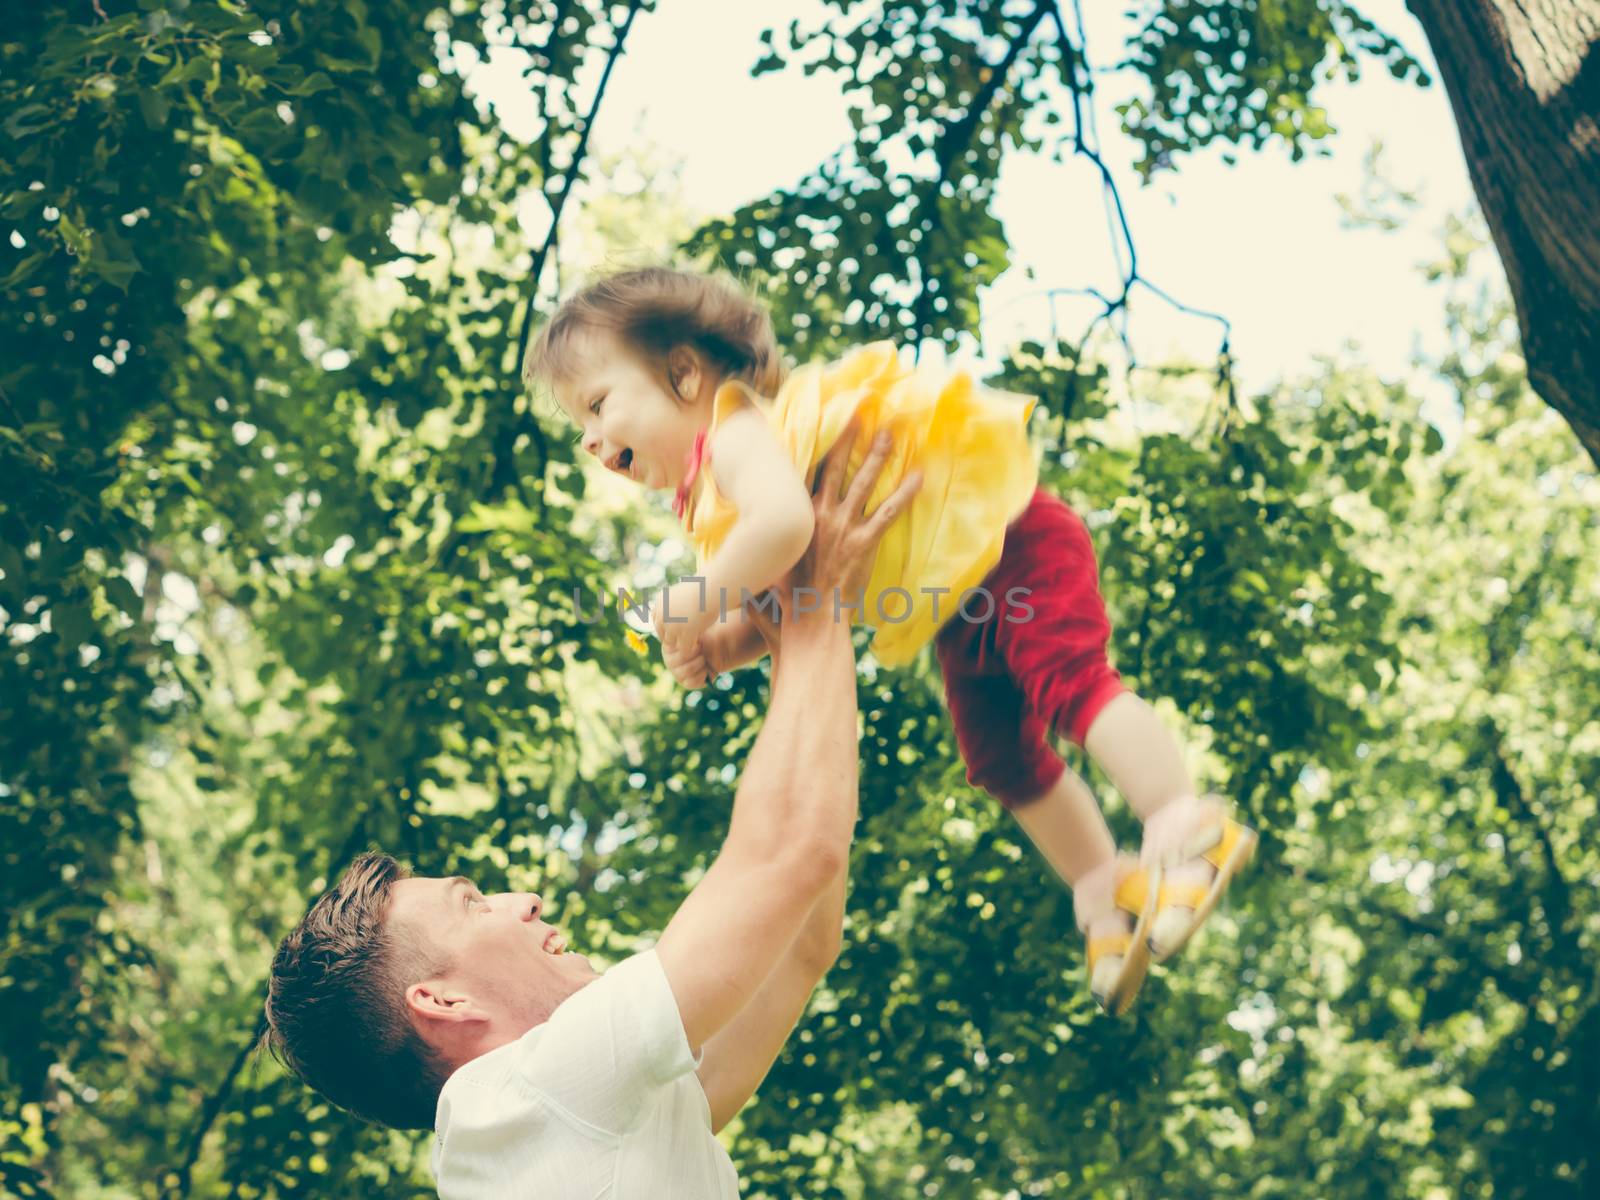 Dad and his little one-year old daughter having fun. Father throws up his little girl. Colorful image for modern life family concept